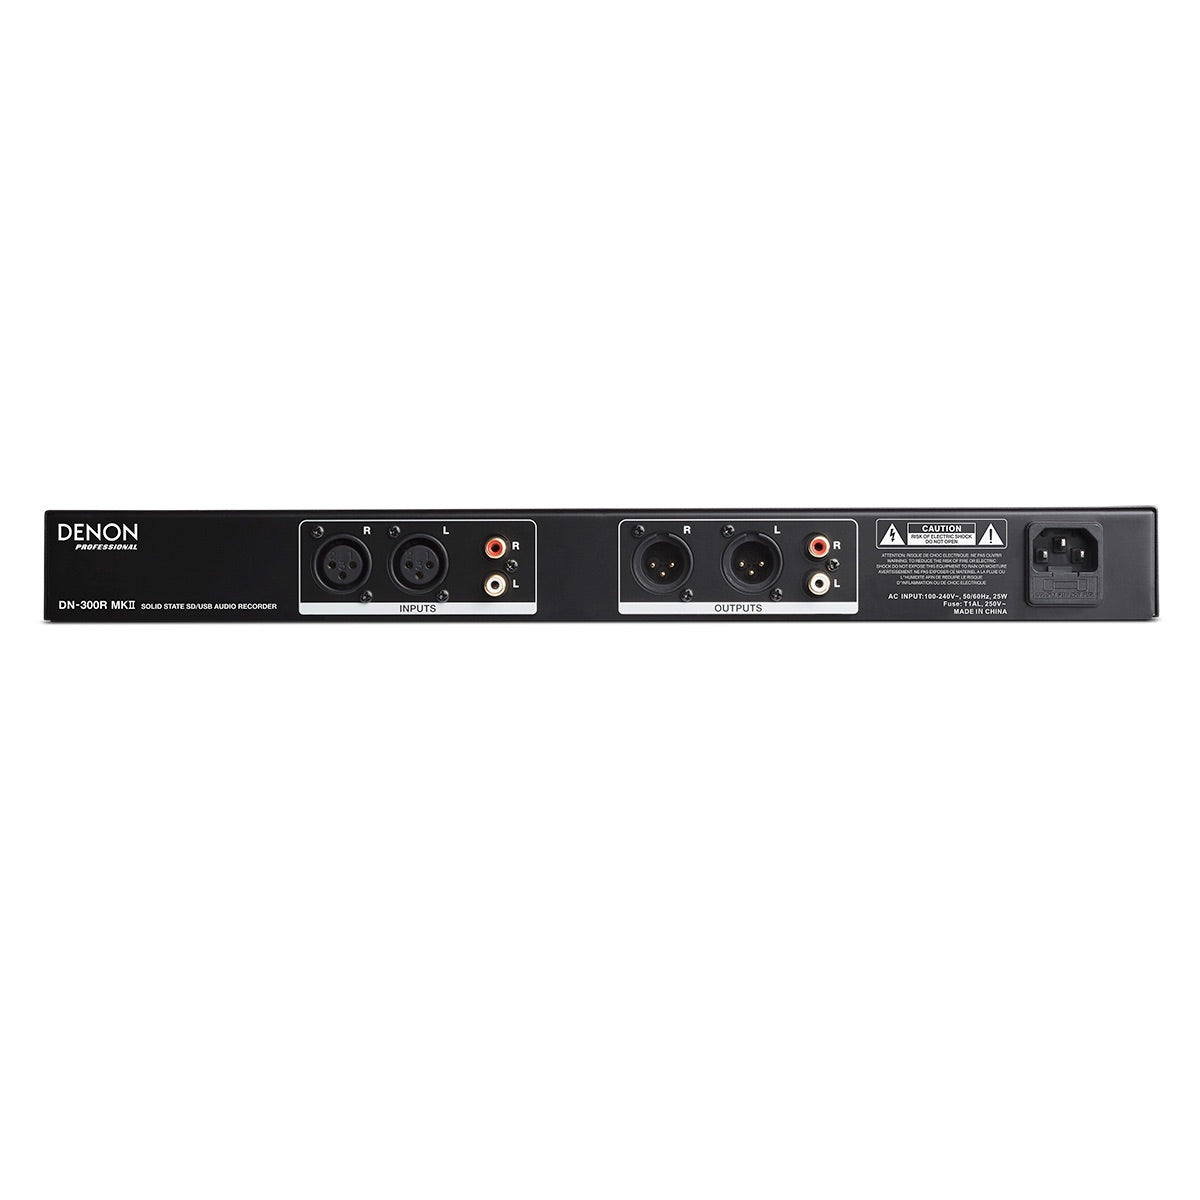 Denon DN-300R MKII Solid-State SD/USB Audio Recorder with XLR Outputs, rear